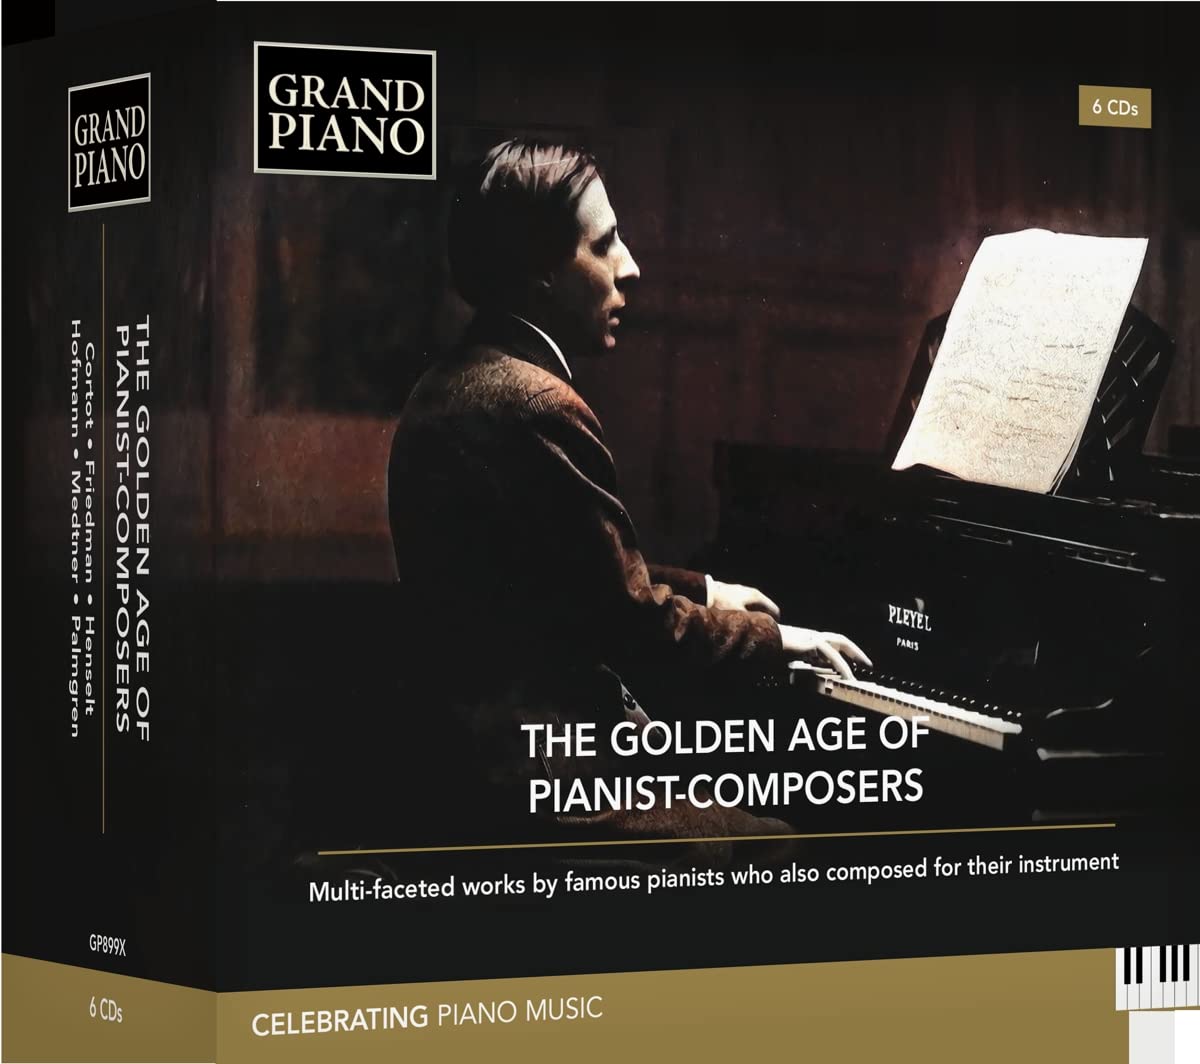 The Golden Age Of Pianist-Composers